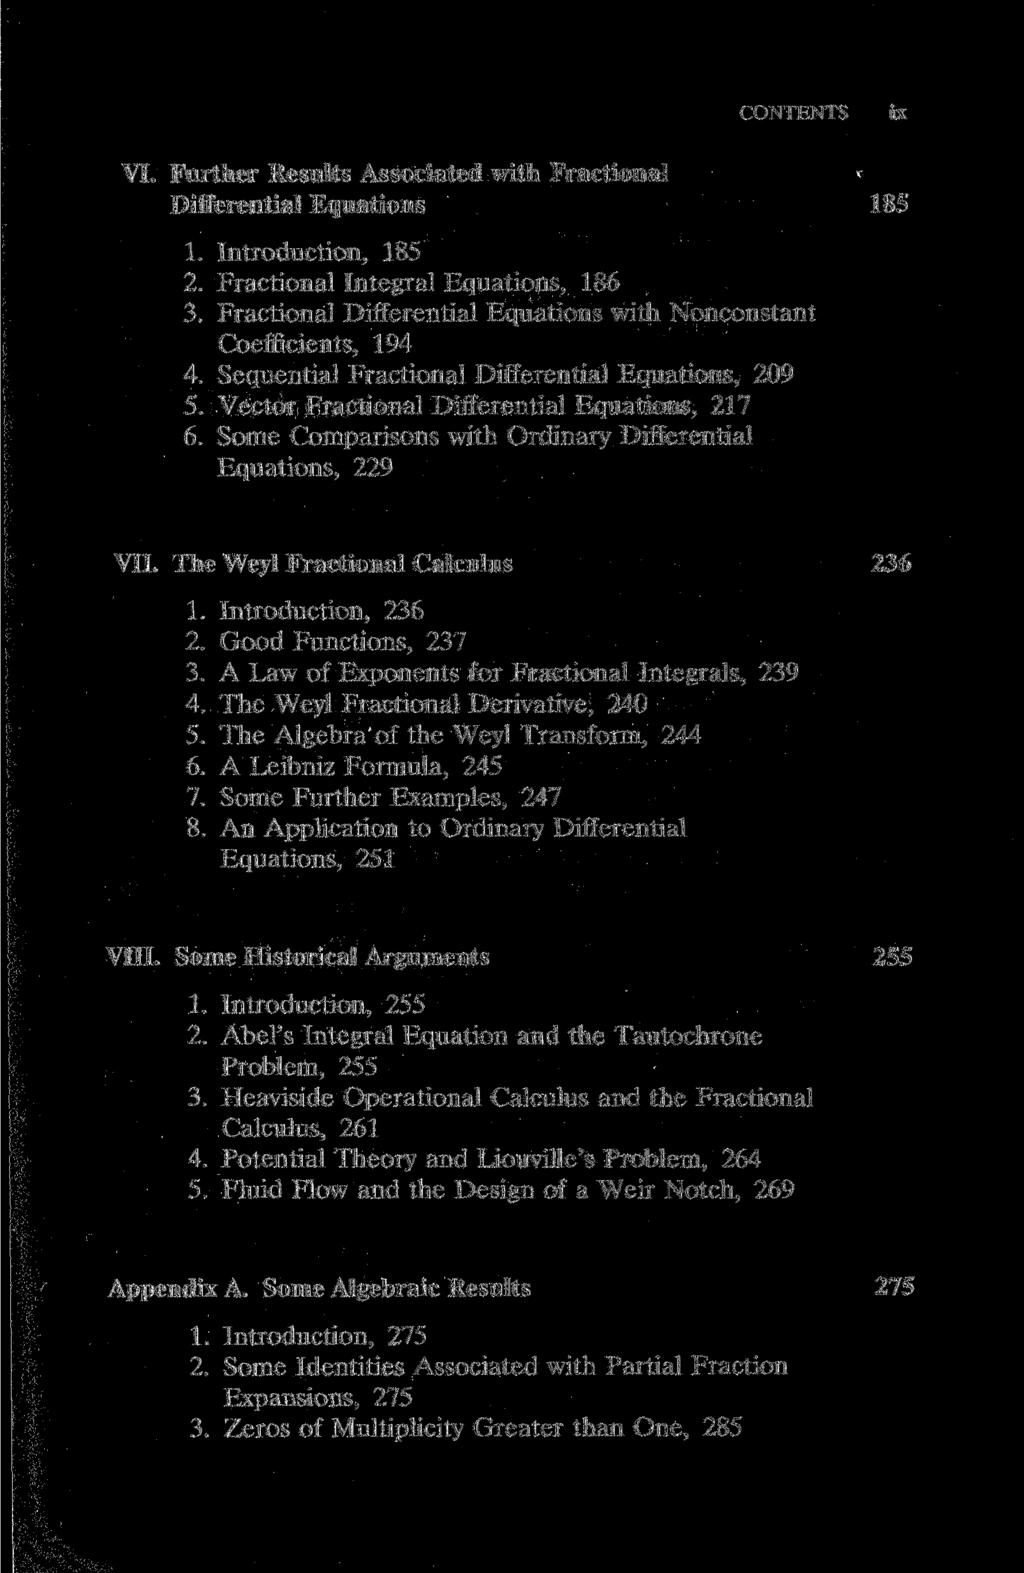 CONTENTS ix VI. Further Results Associated with Fractional Differential Equations 185 1. Introduction, 185 2. Fractional Integral Equations, 186 3.